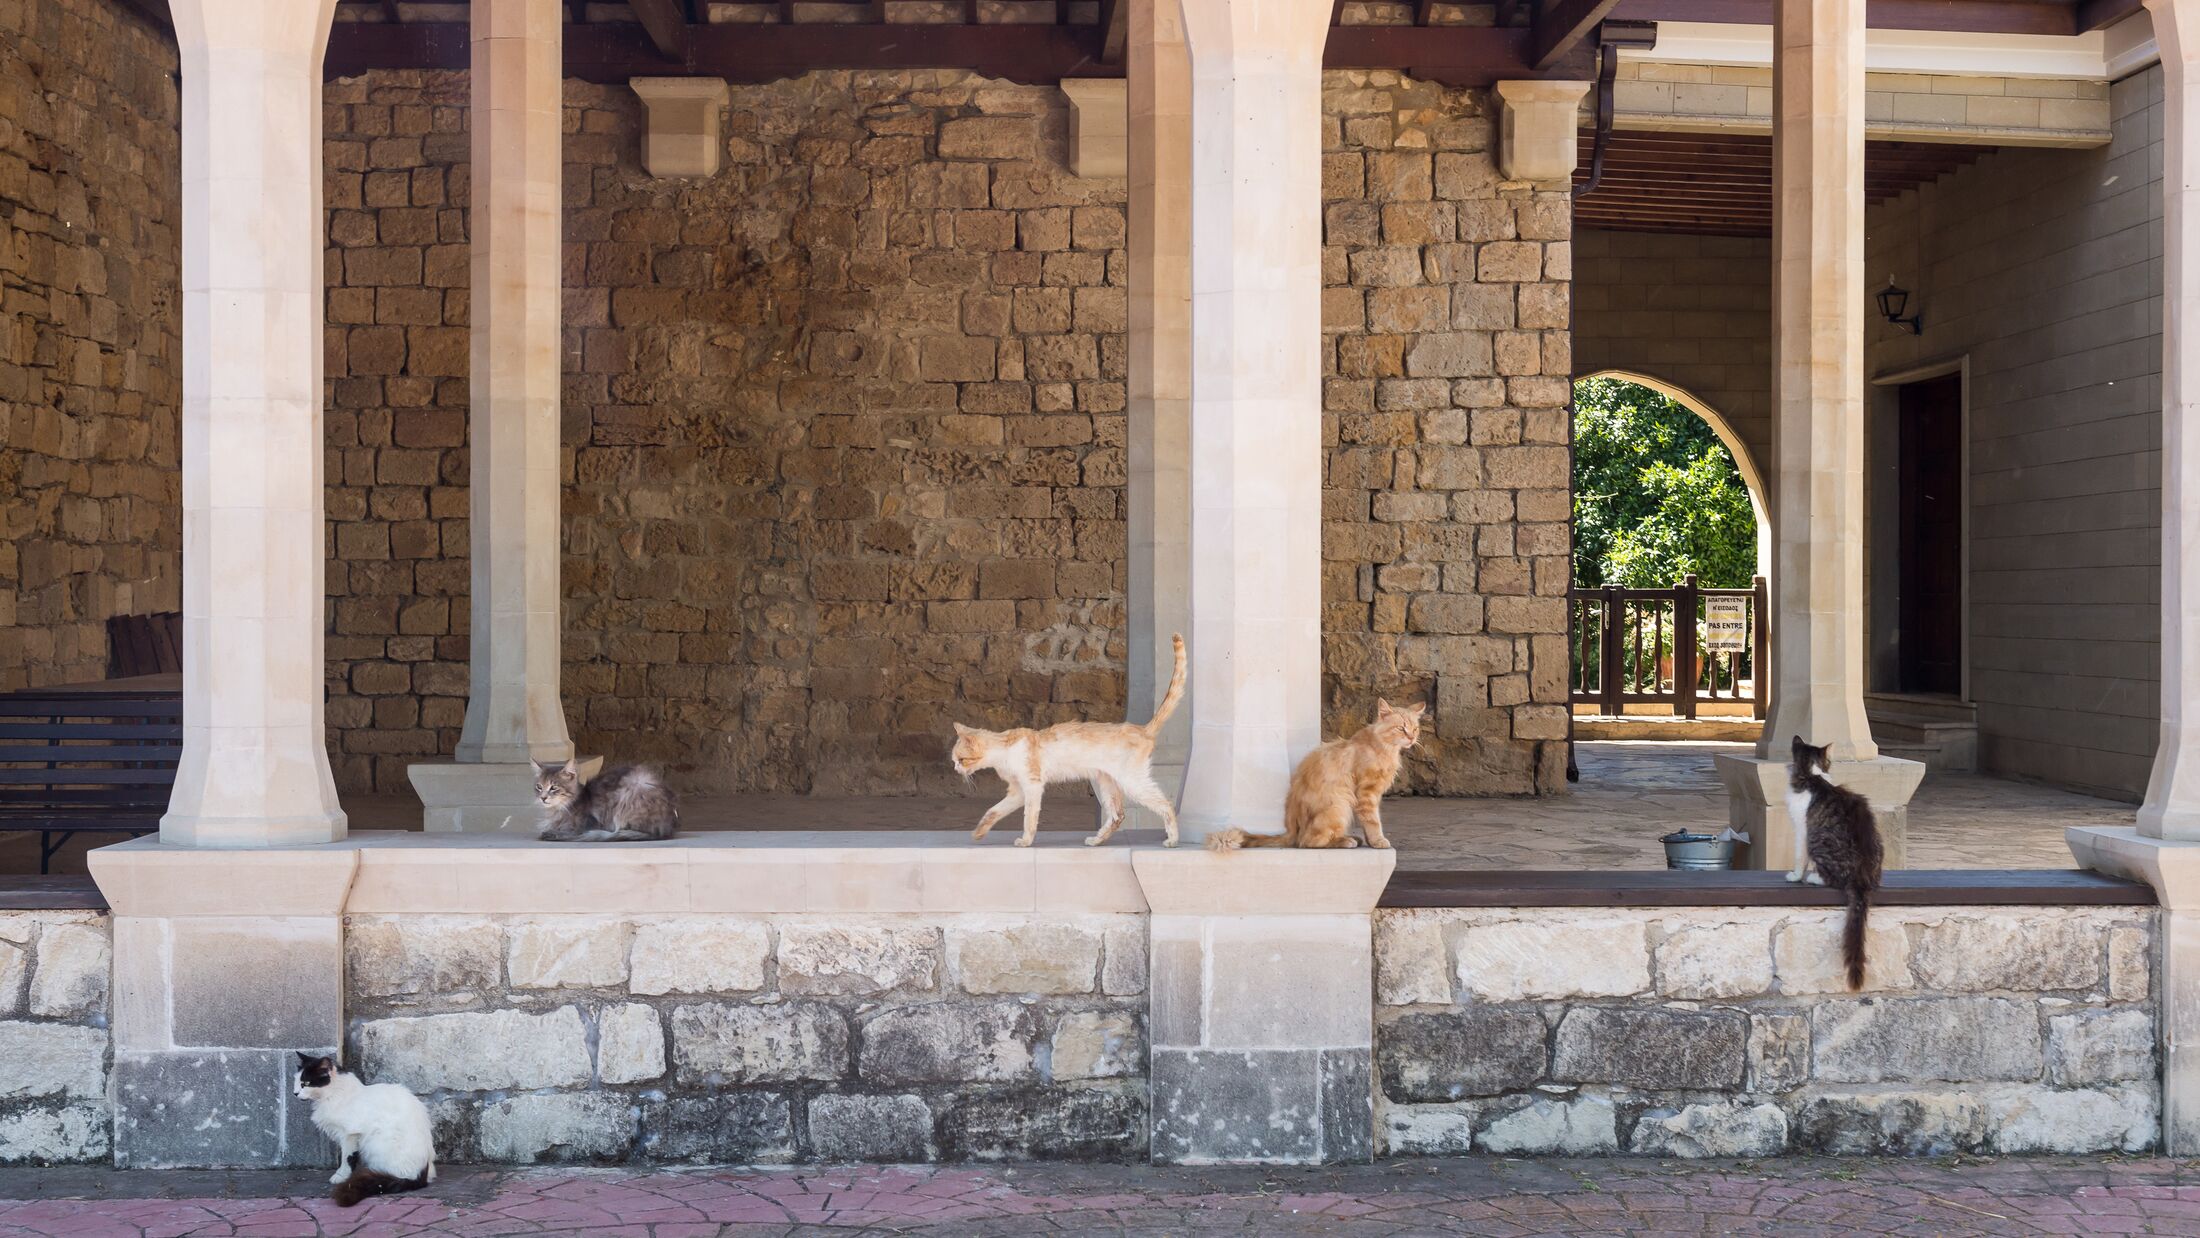 Holy Monastery of St Nicholas of the Cats on Cyprus